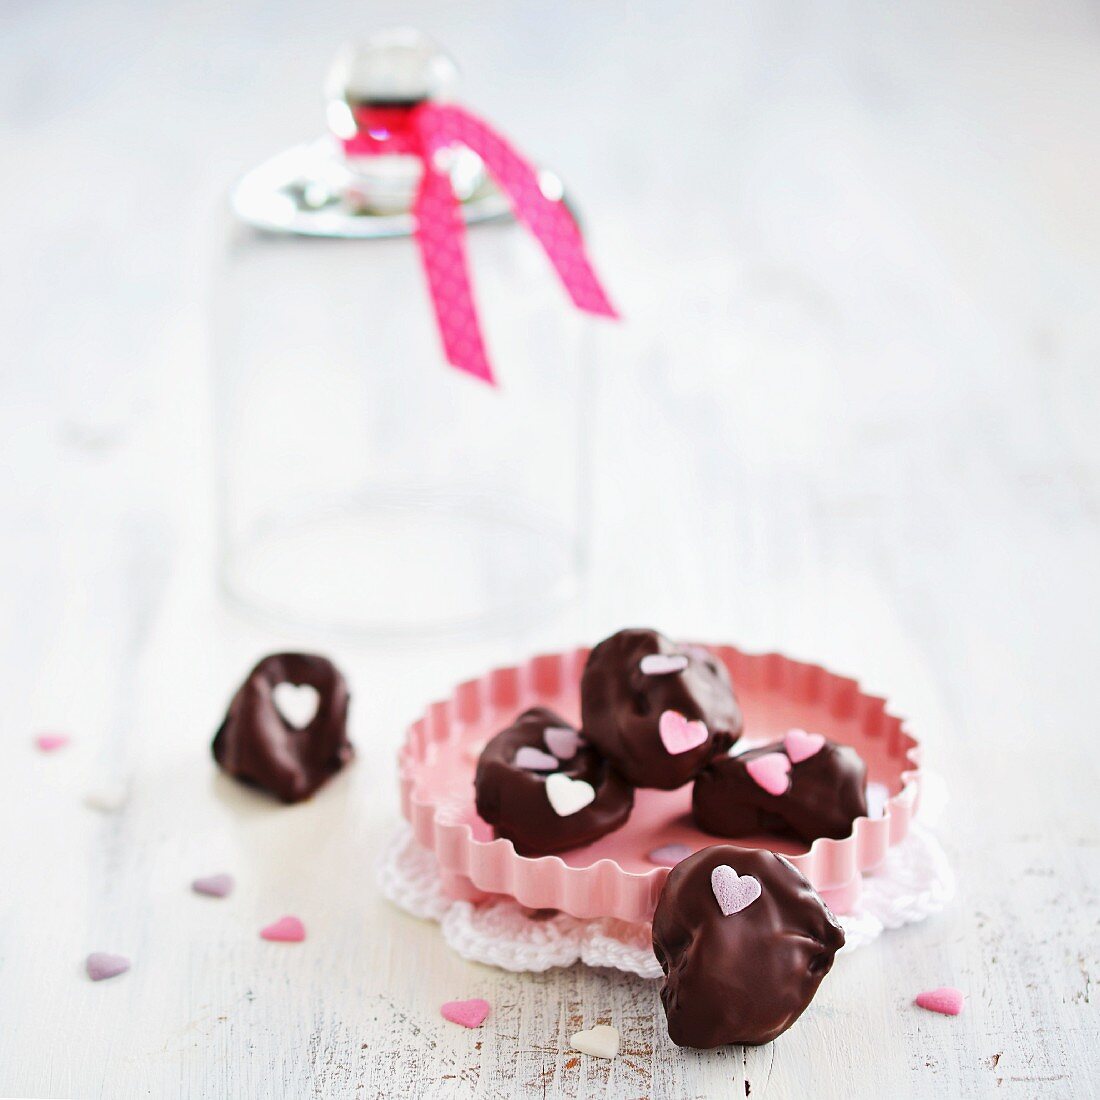 Plums in chocolate decorated with sugar hearts